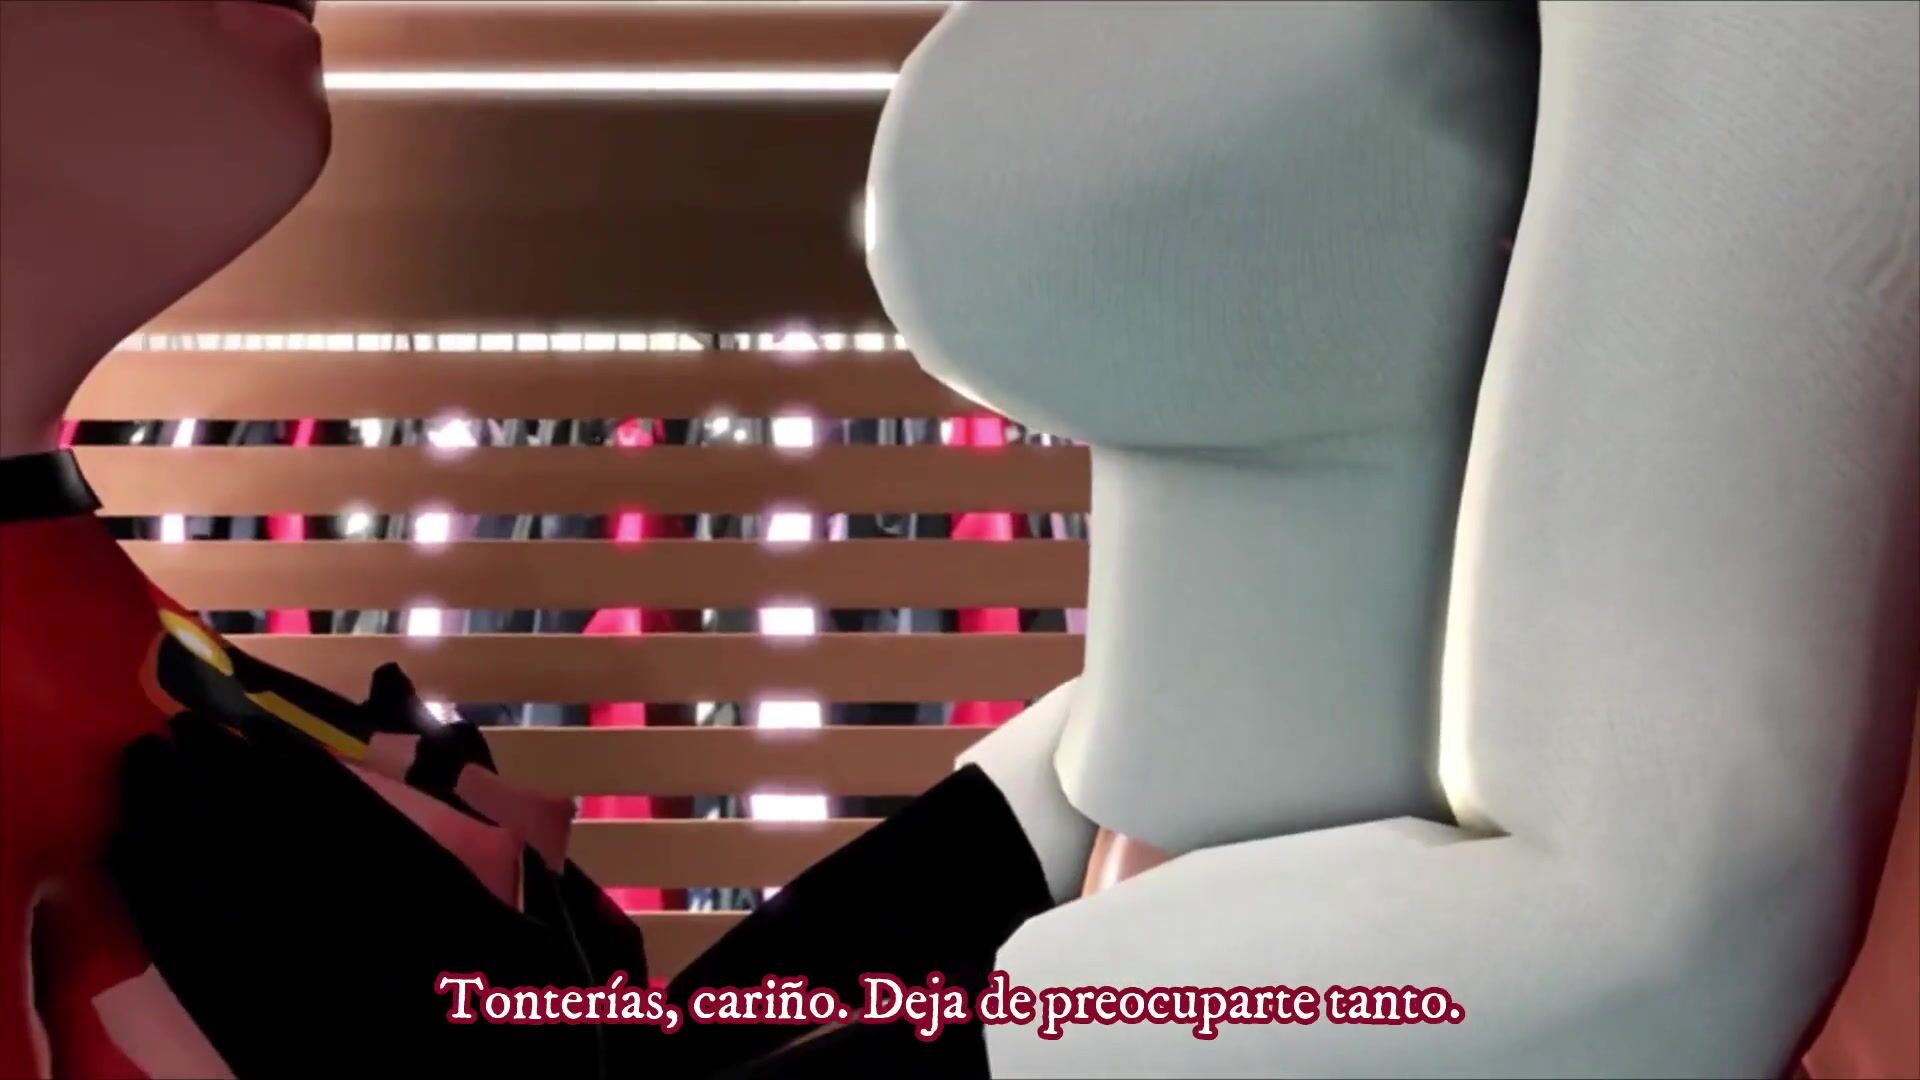 Helen and Violet Parr in the changing room (no security camera guy) (Sub Español)